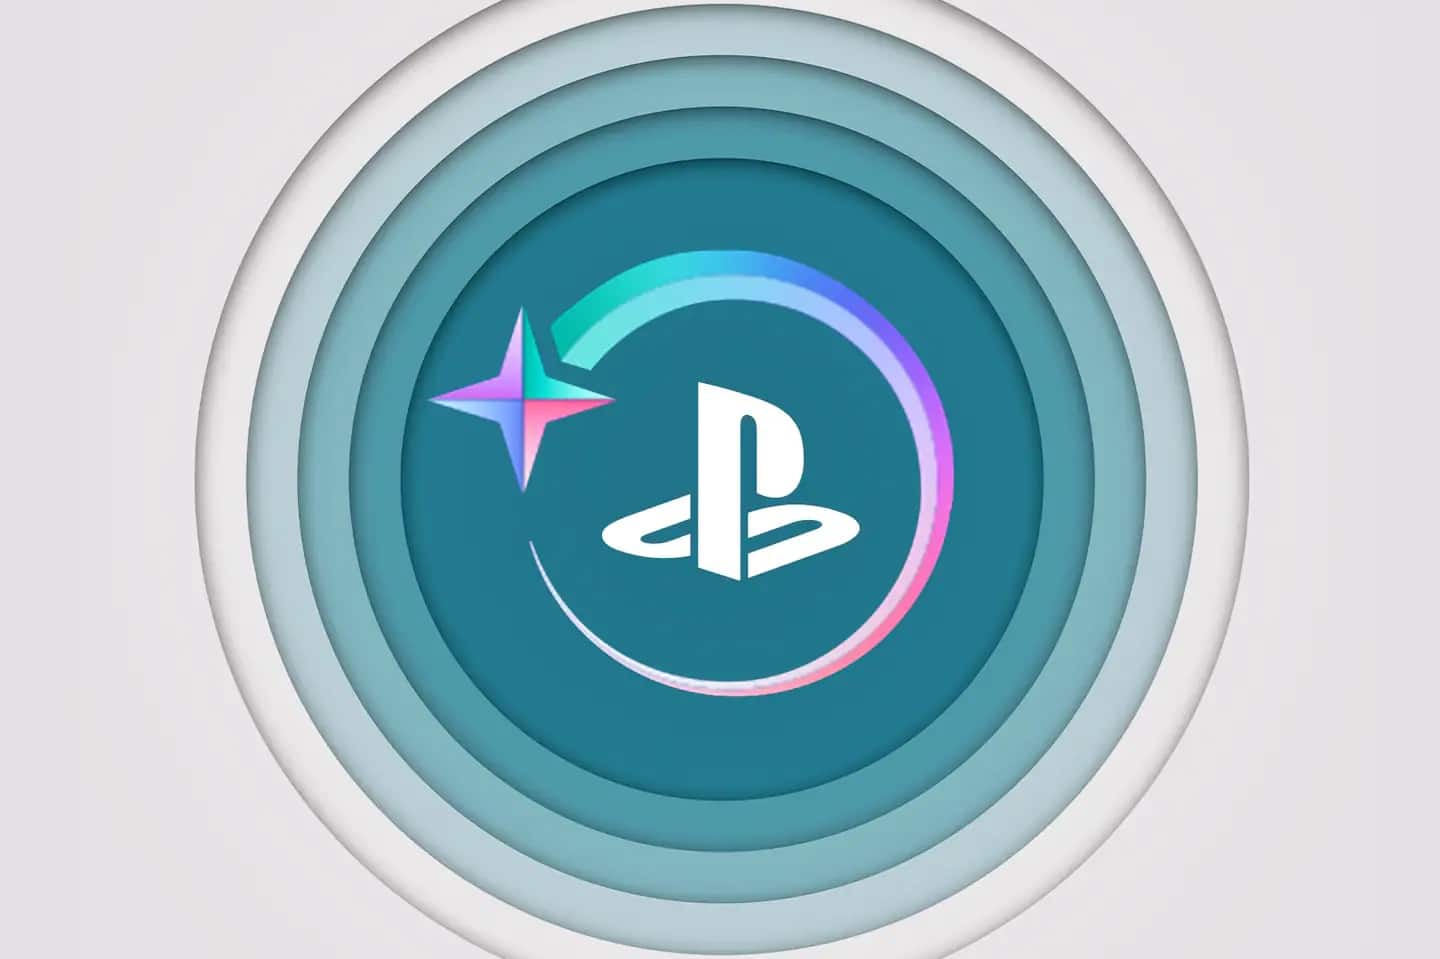 PlayStation Stars – State of Play Sep 2022 Digital Collectibles